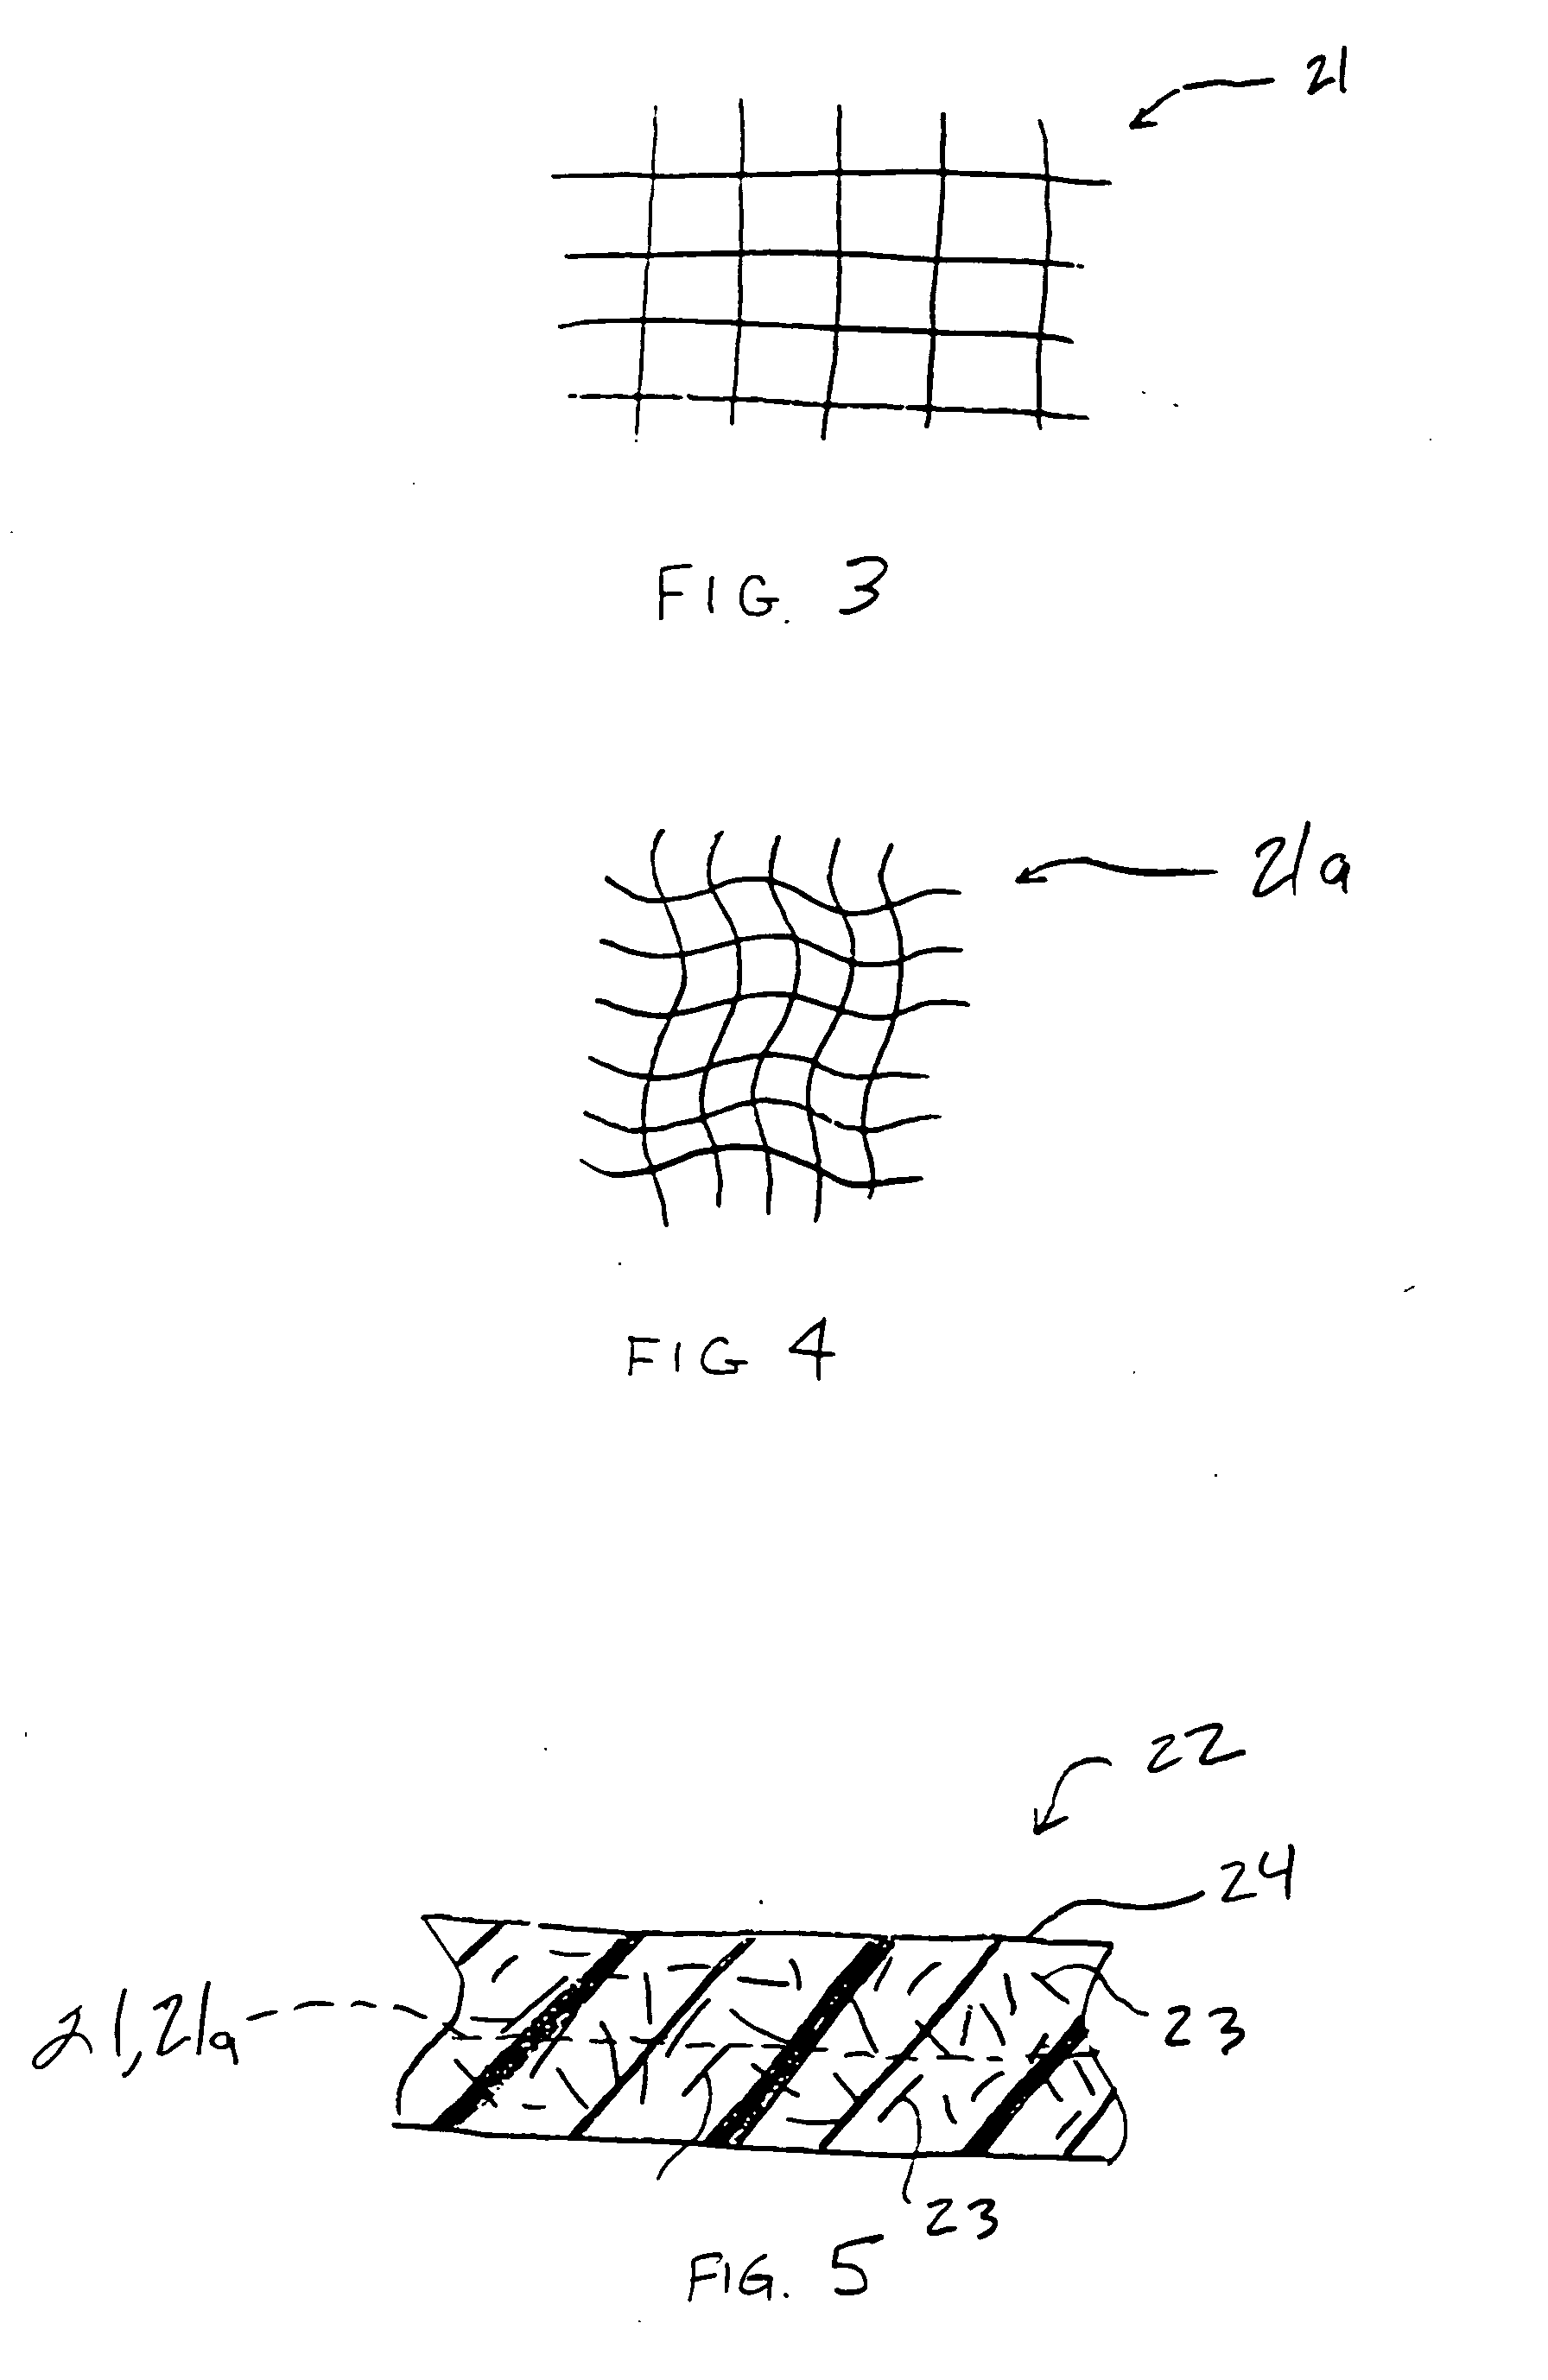 Reinforced foam covering for cryogenic fuel tanks